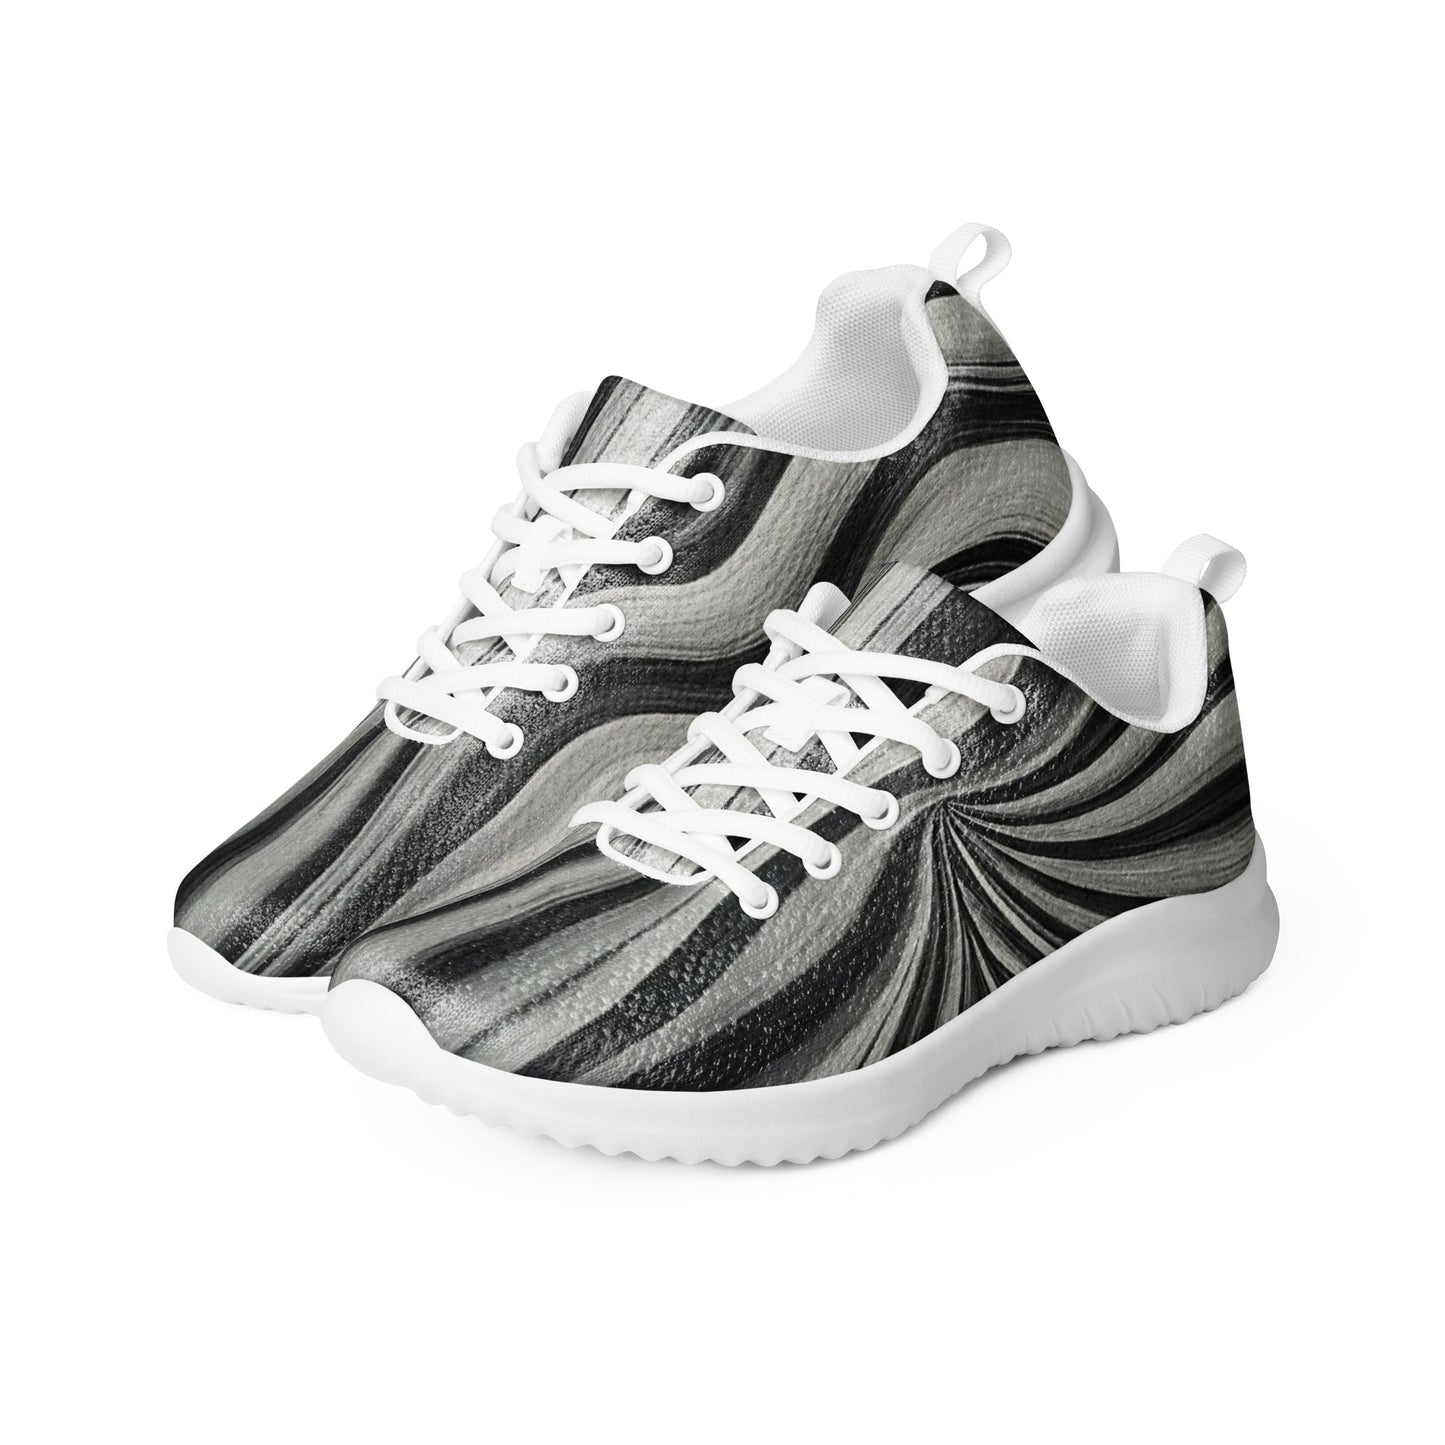 Women’s athletic shoes - WS 112